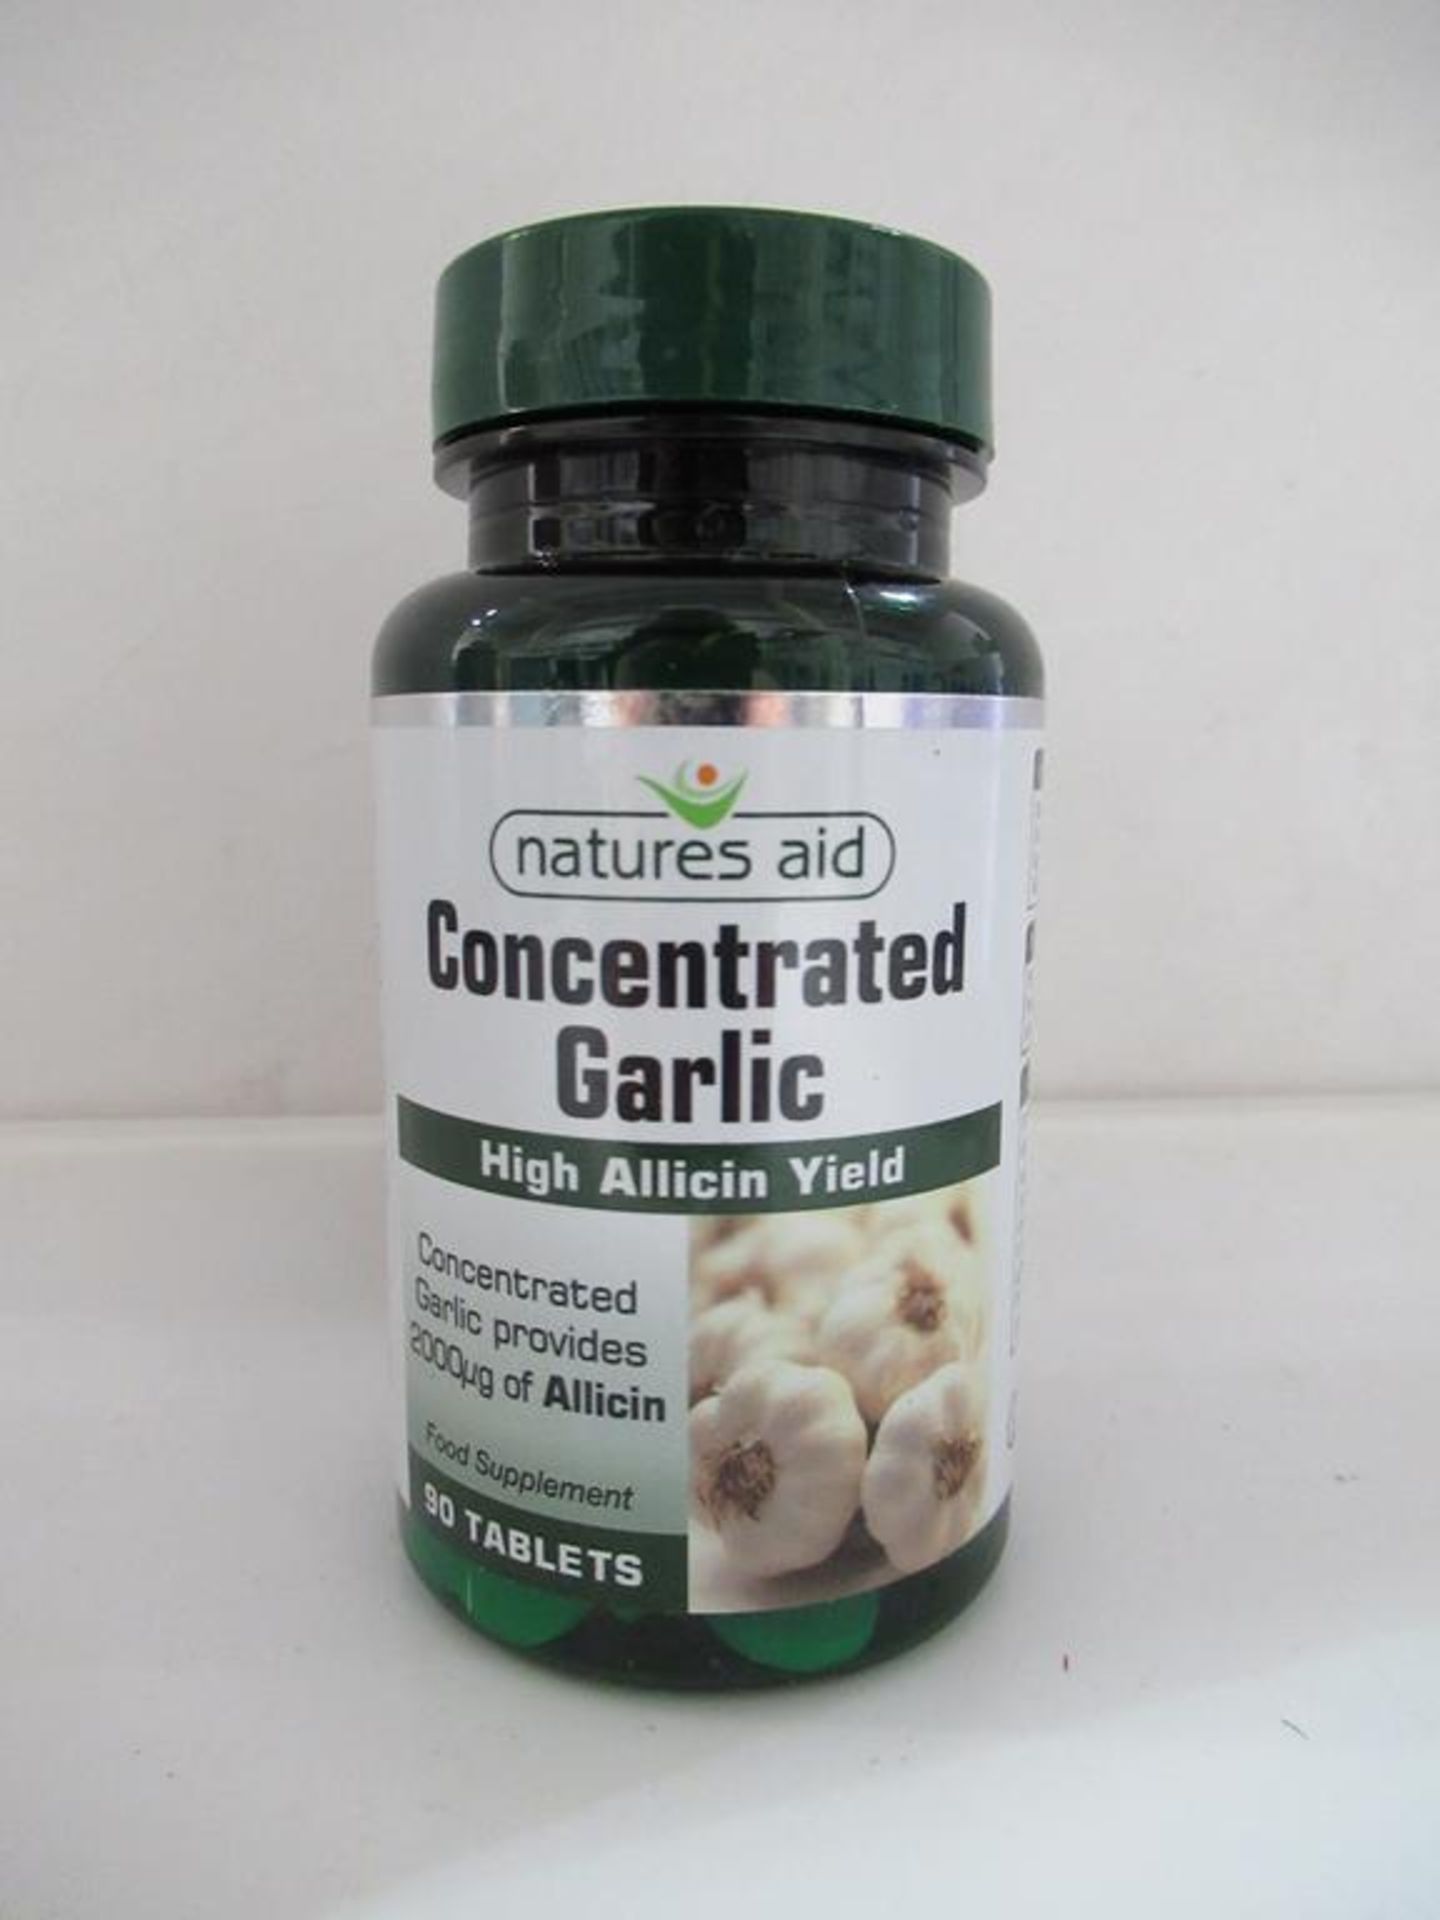 12 Natures Aid supplements to include Fish Oil, Quercetin Formula, Red Clover, Concentrated Garlic, - Image 6 of 7